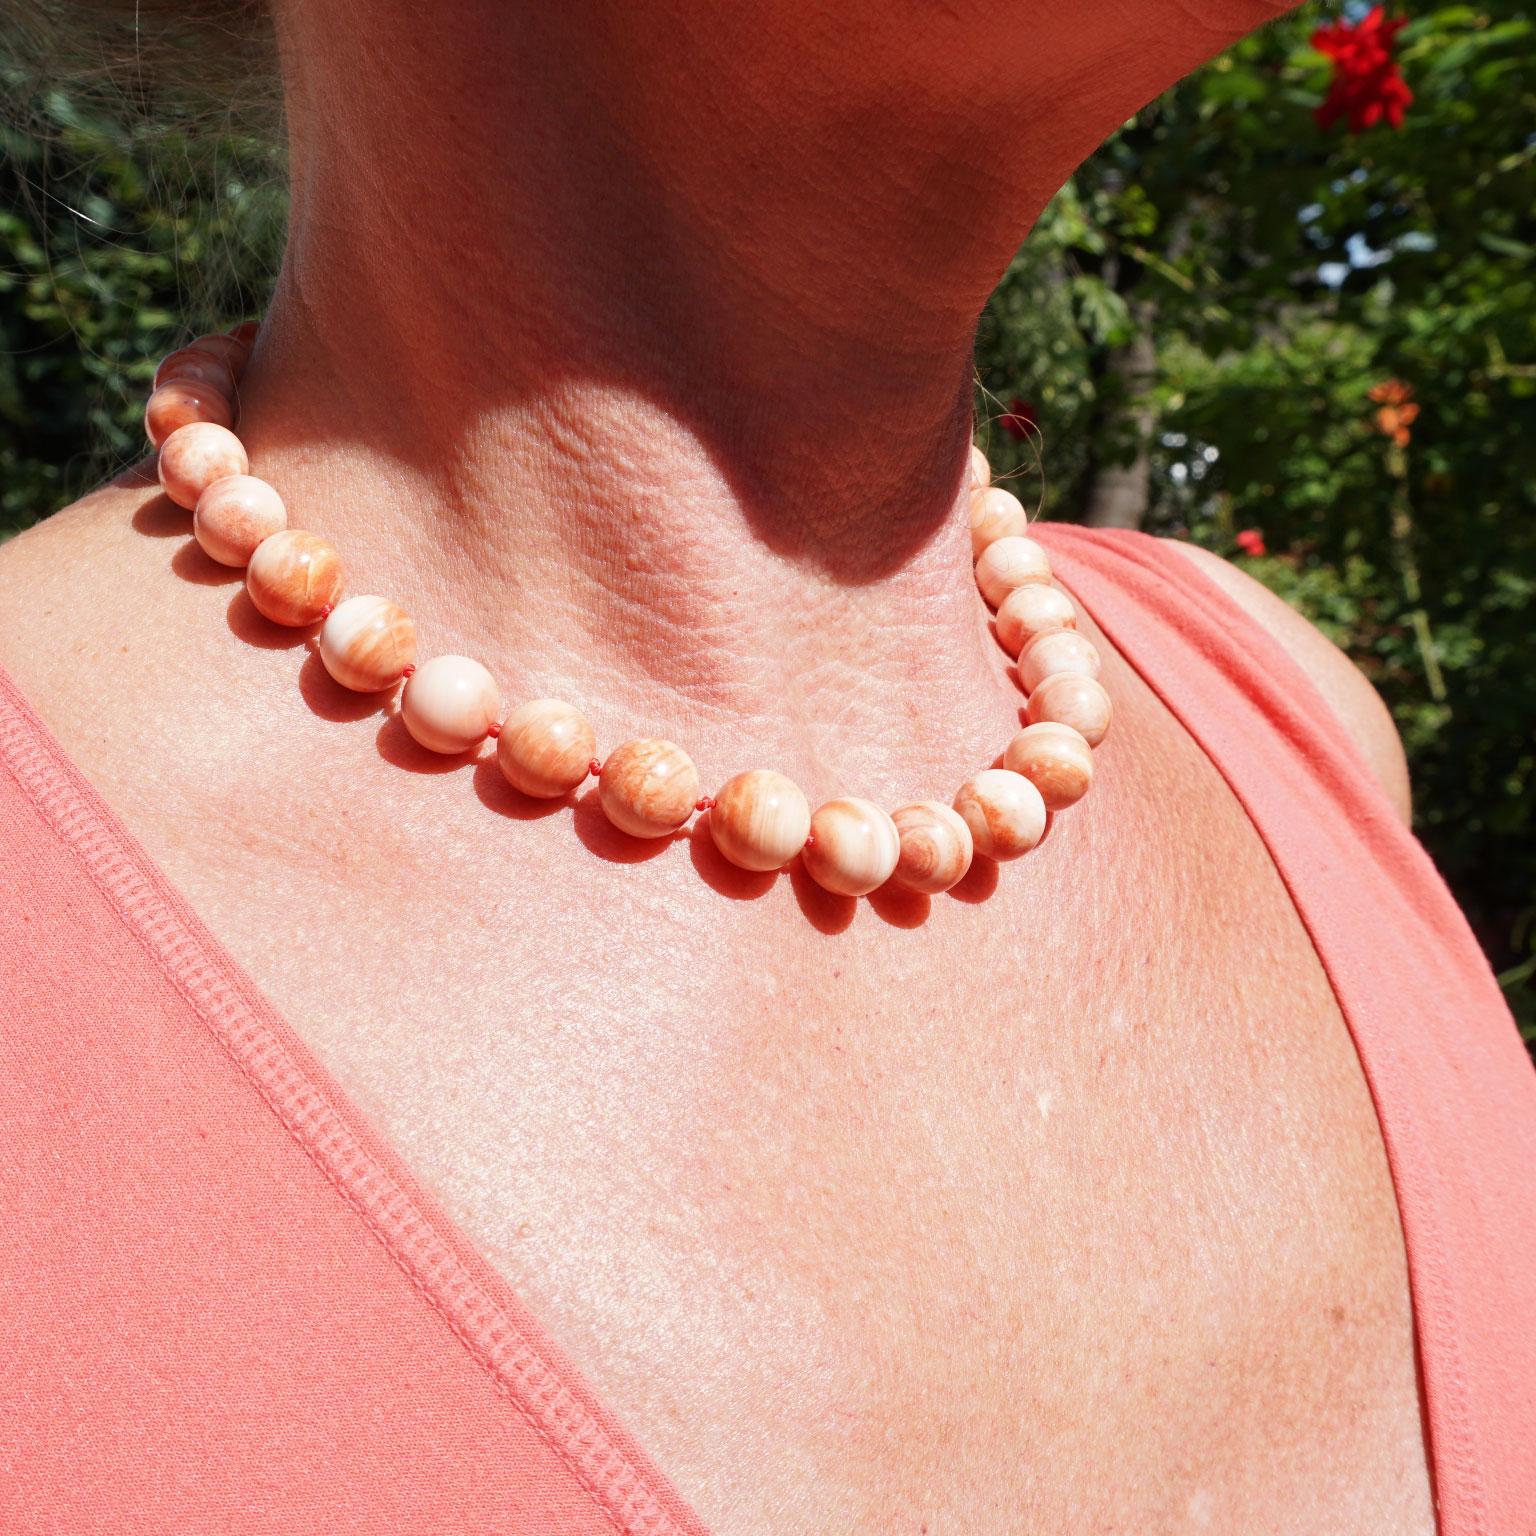 Necklace made of apple coral

Elegant jewellery for the neck from the depths of the sea. This necklace has a striped pattern in shades ranging from delicate pink to dark red. The balls of the same size are individually knotted and connected by a